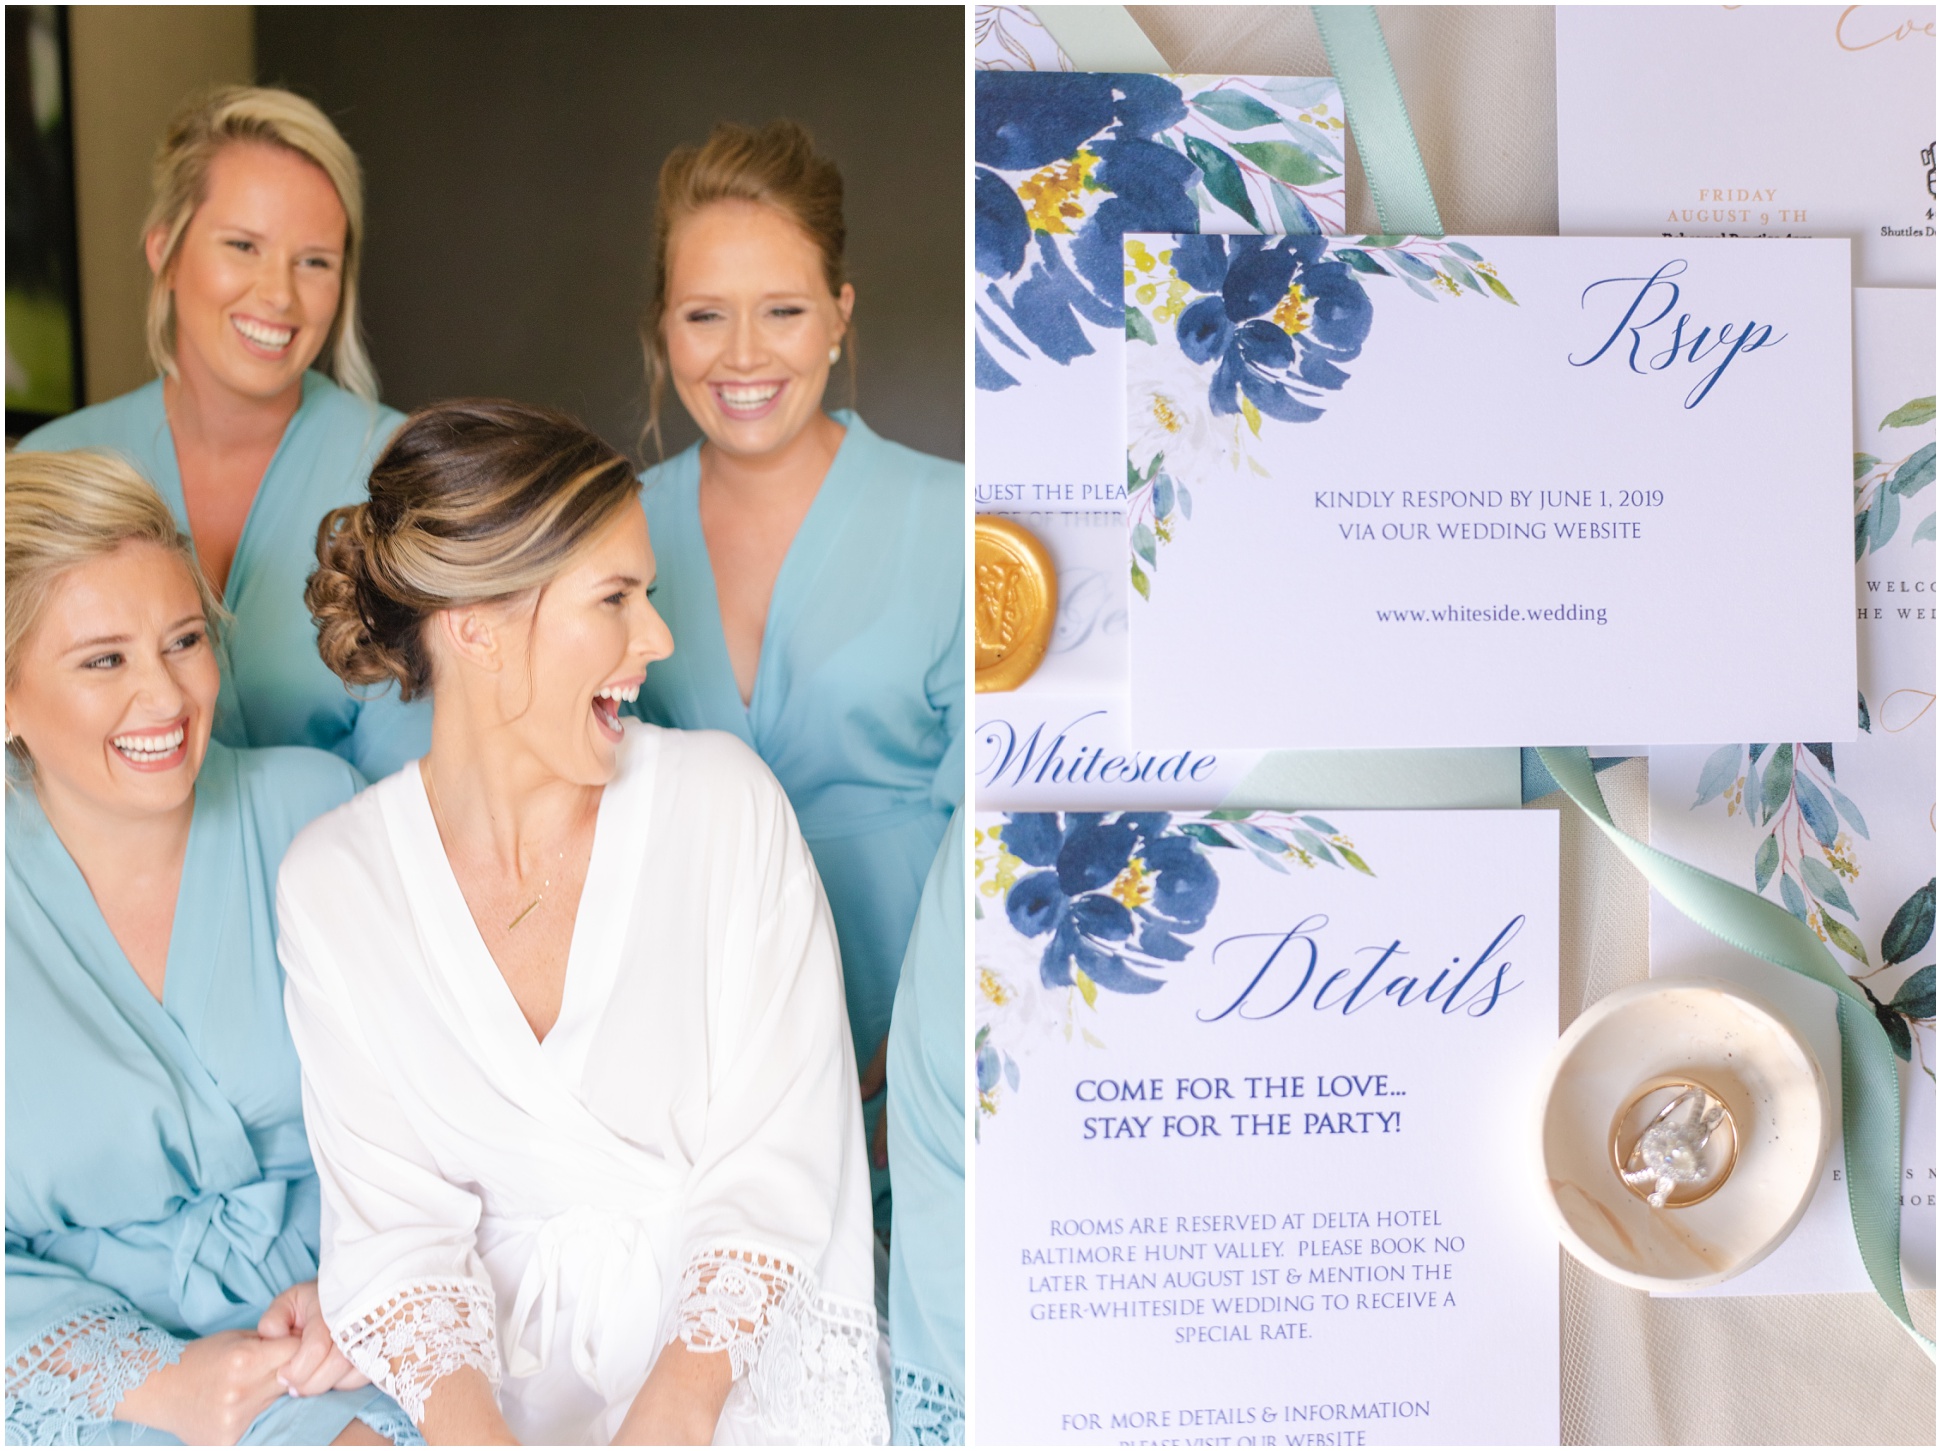 Bride laughing on the left, and invitation suite on the right